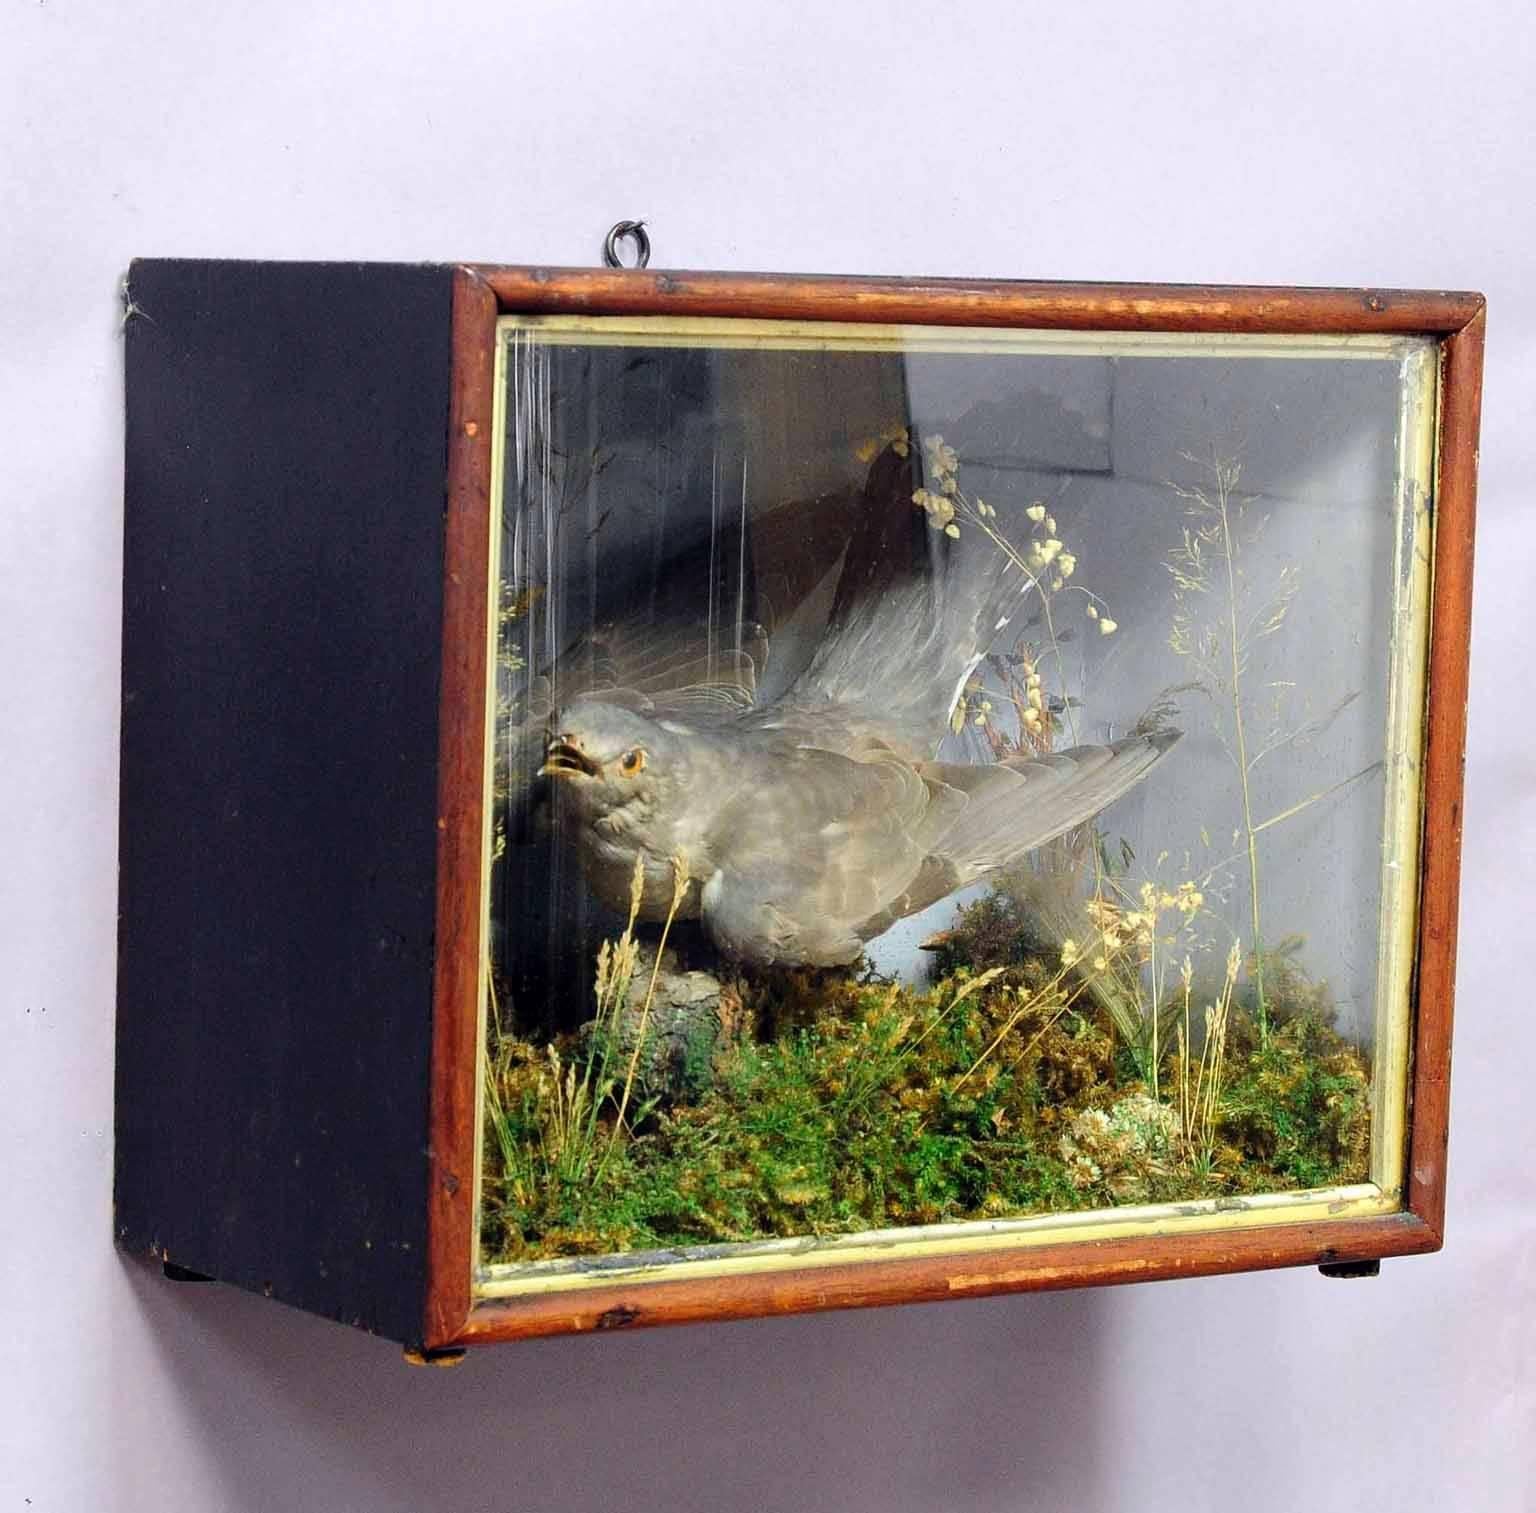 An old taxidermy display case depicting scenery with a cuckoo. Used as teaching material in German school, circa 1900.